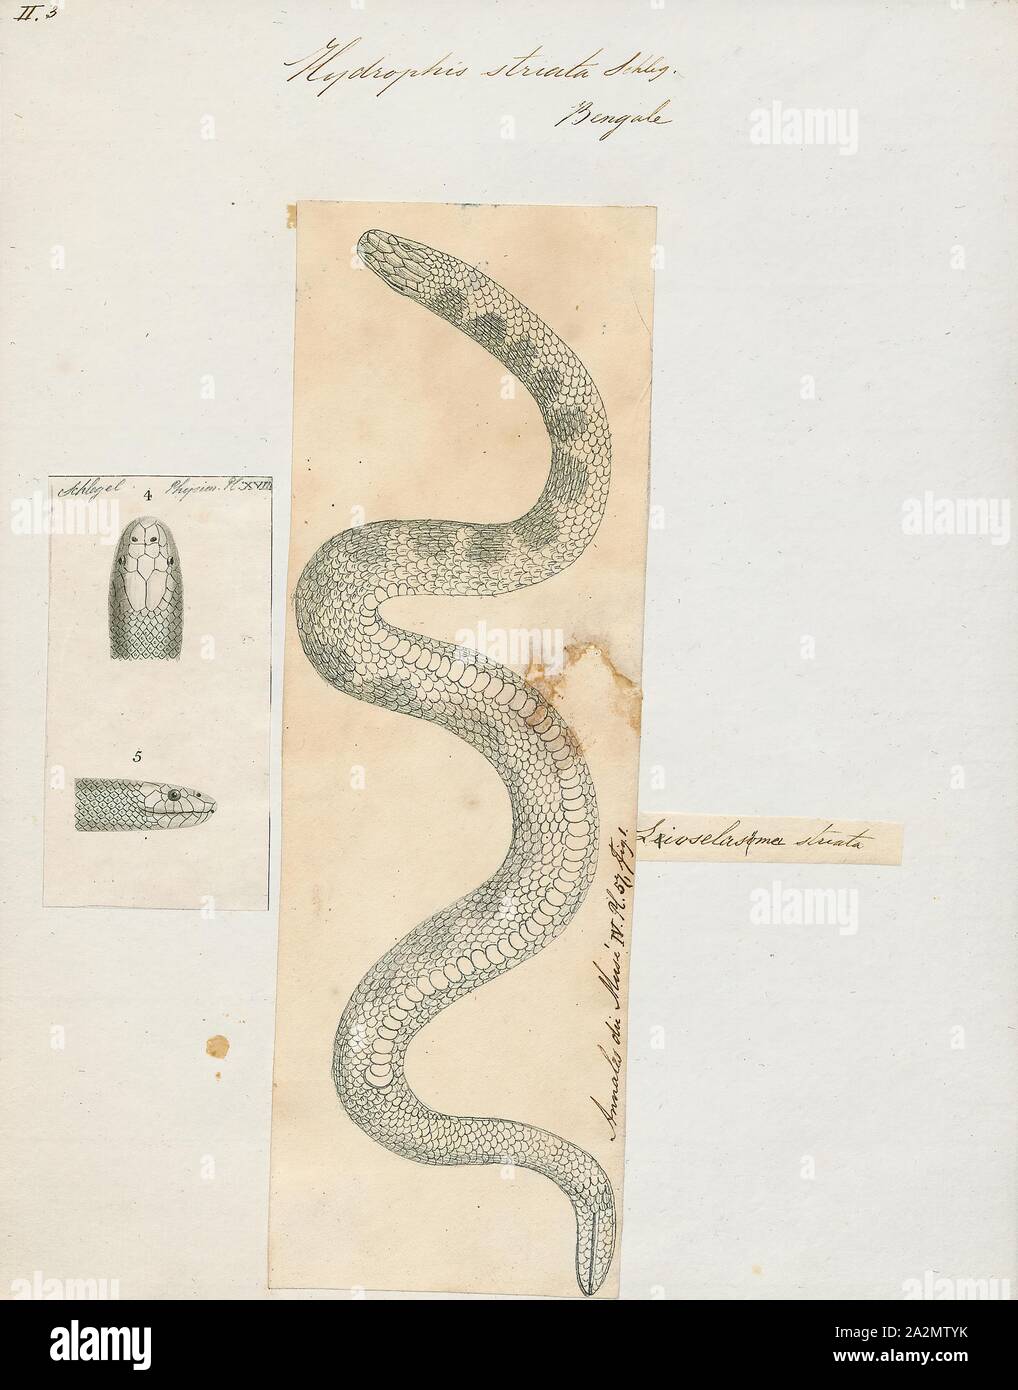 Hydrophis striata, Print, Hydrophis is a genus of sea snakes. They are typically found in Indo-Australian and Southeast Asian waters., 1700-1880 Stock Photo